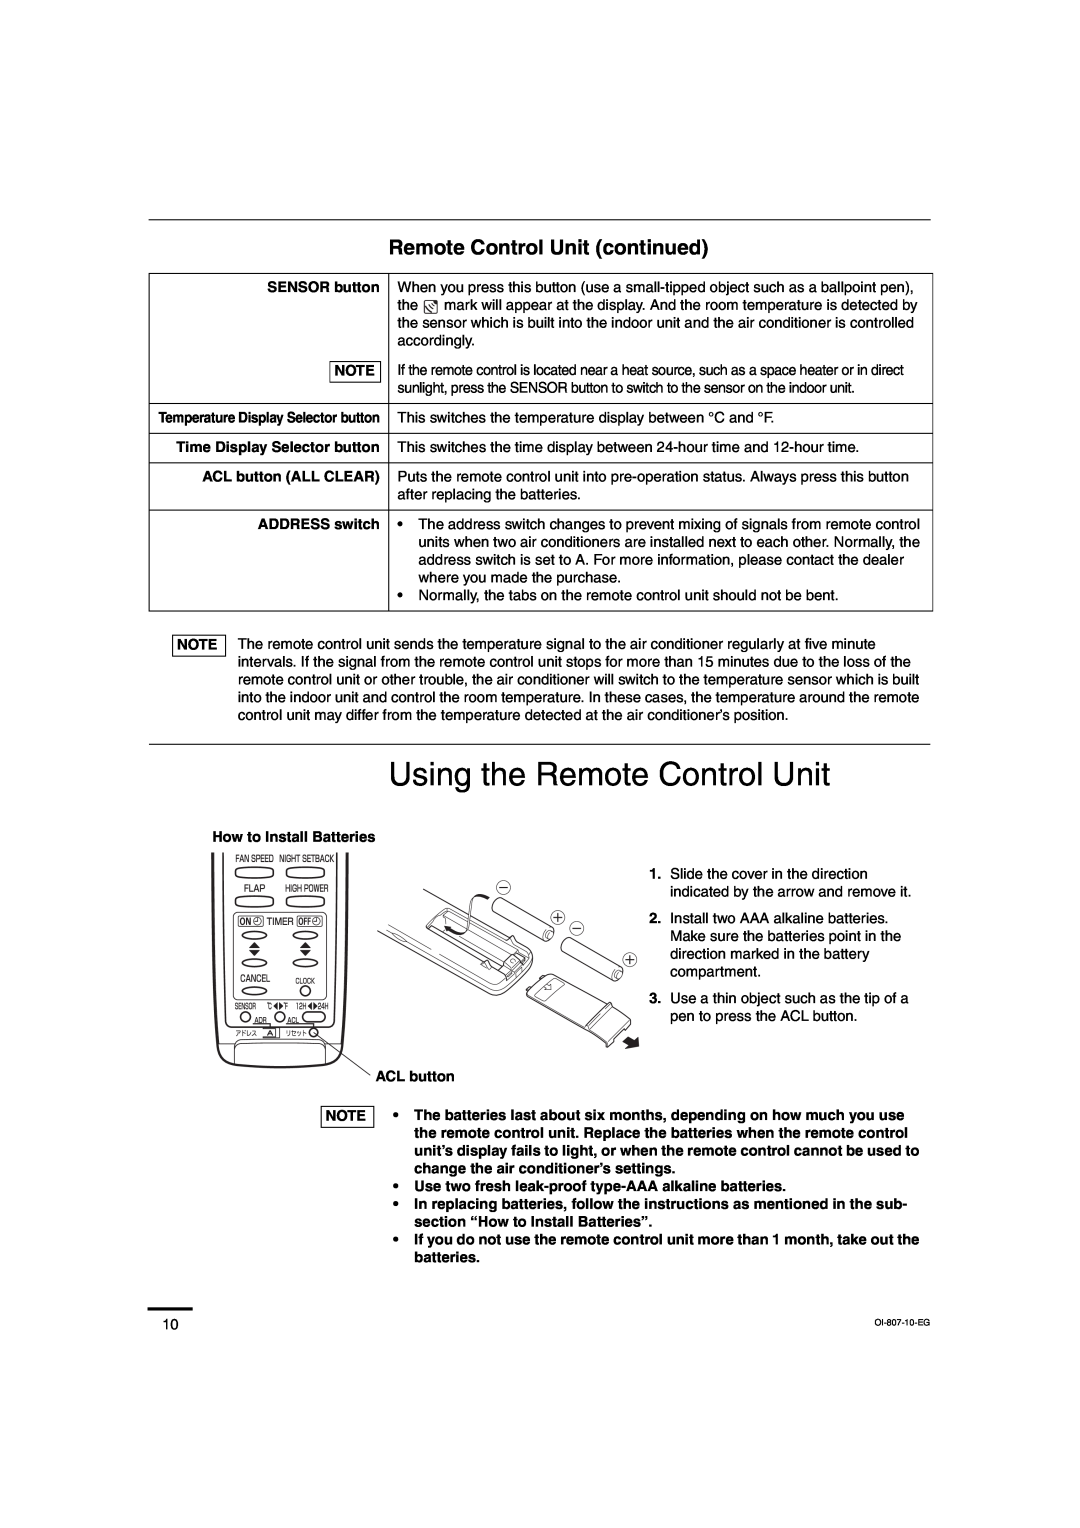 Sanyo KMS2472, KMS1872 service manual Using the Remote Control Unit, Remote Control Unit continued 